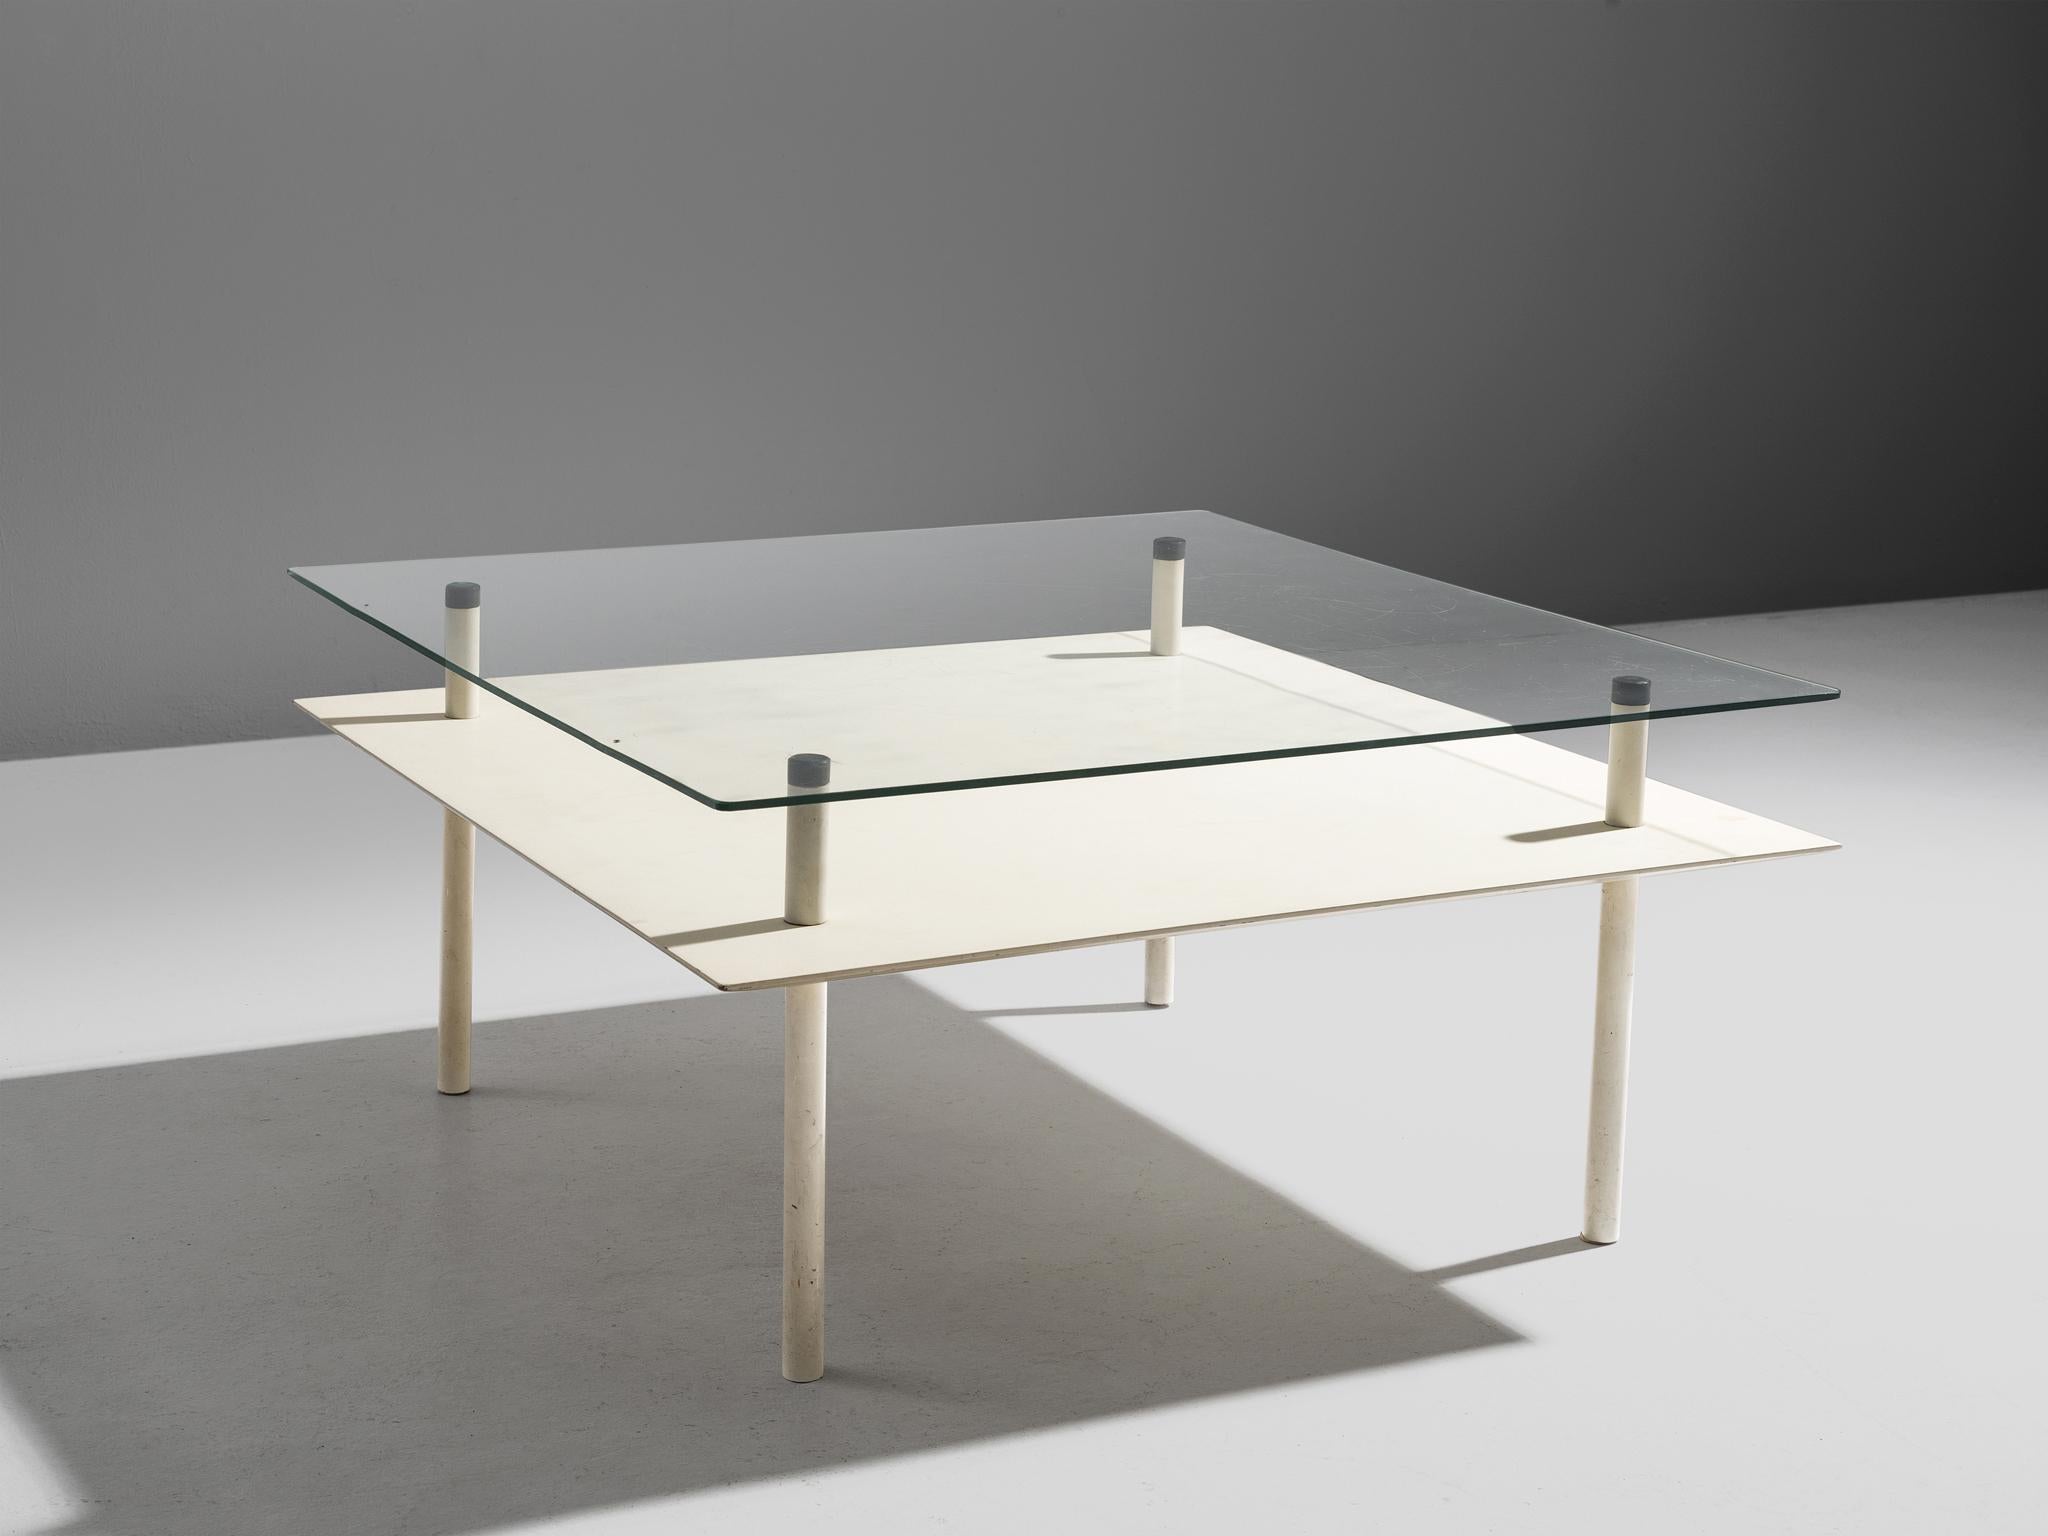 Elmar Berkovich for Metz&Co, coffee table, lacquered steel, lacquered metal, glass, The Netherlands, 1930s

Modern cocktail table by designer Elmar Berkovich for the Dutch company Metz & Co. A minimalist and functional table characterized by simple